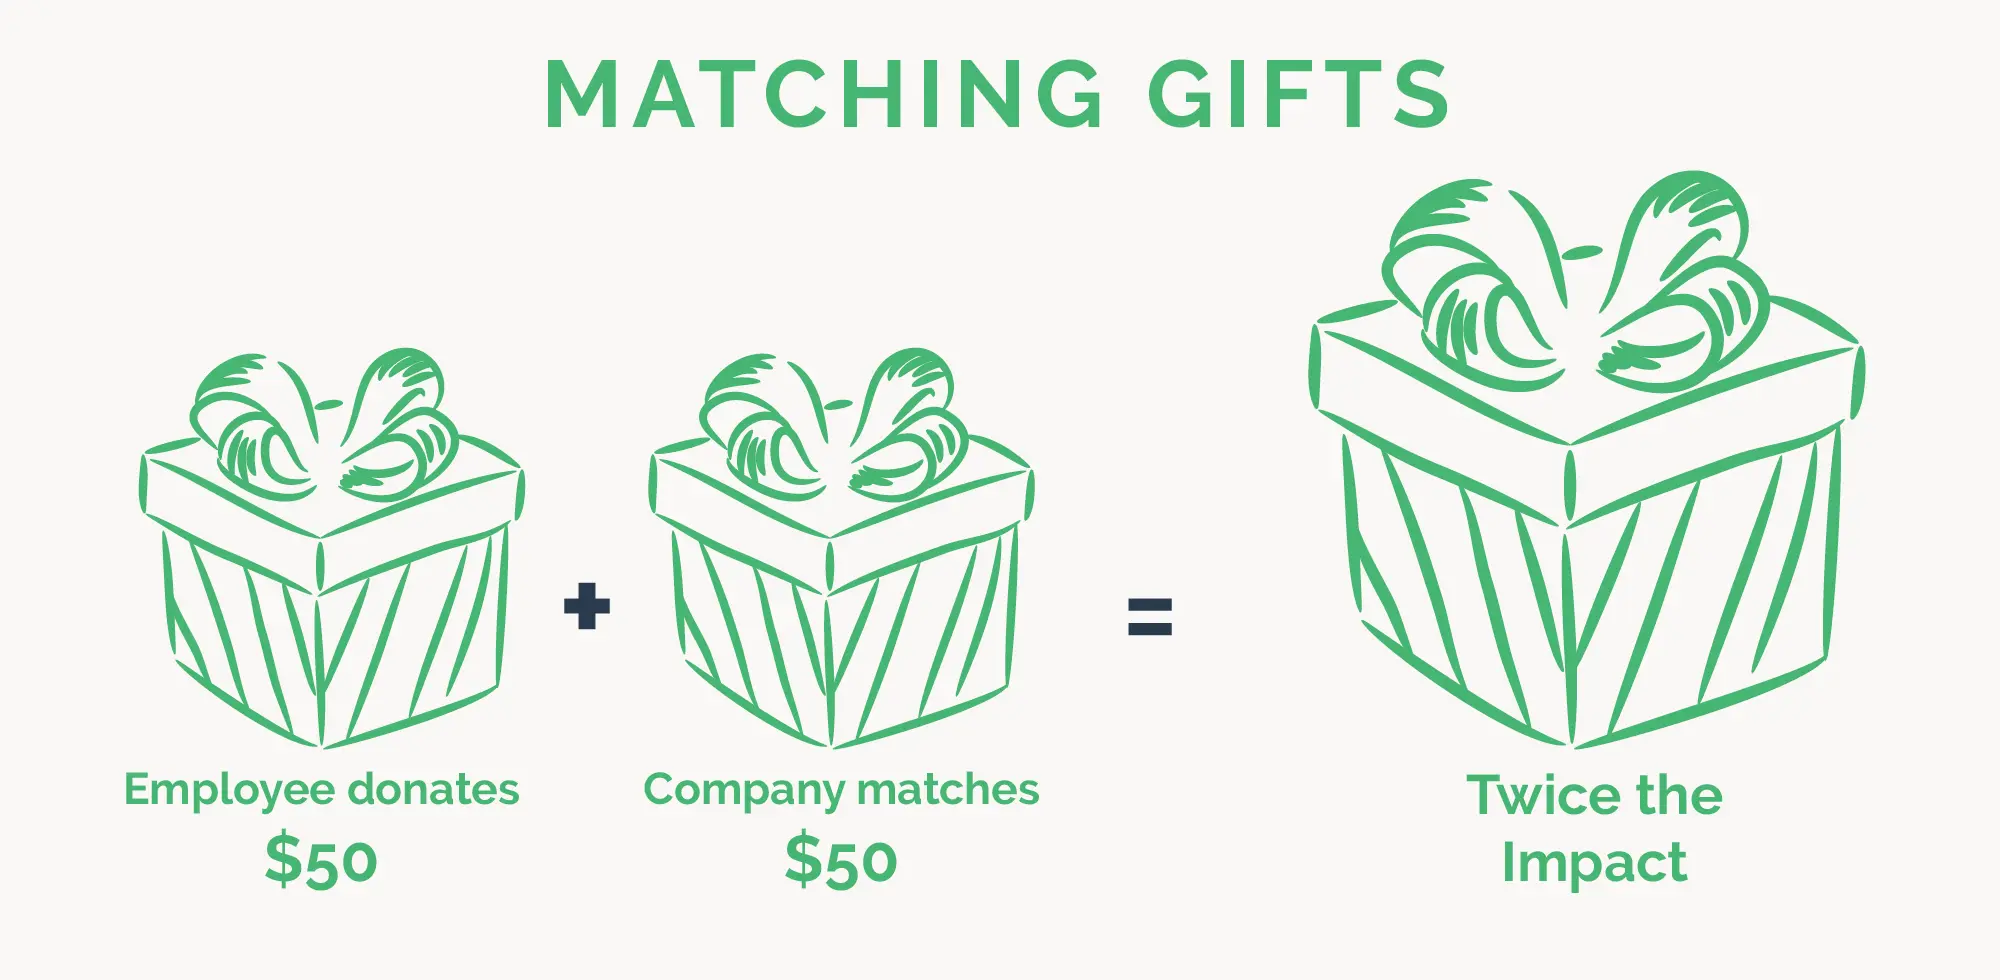 Matching Gift Software Vendors: The Comprehensive List